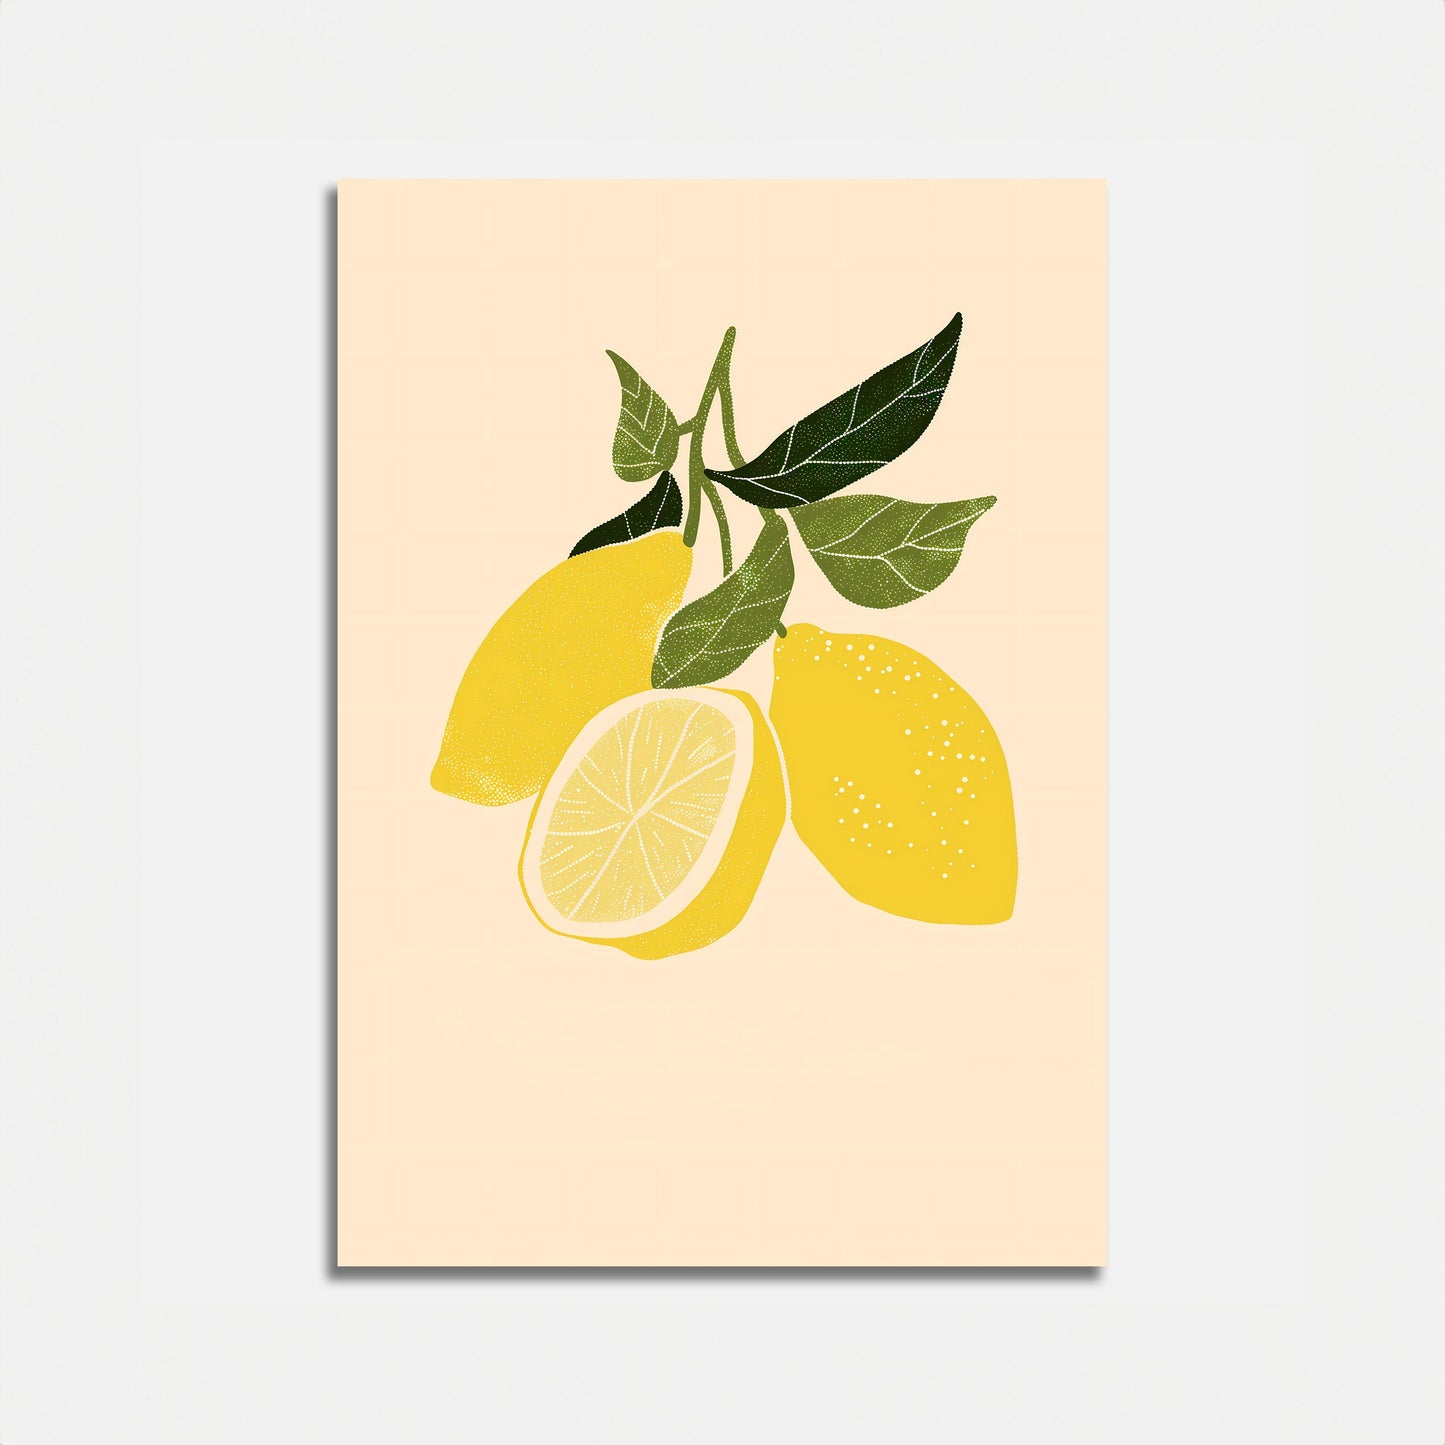 Illustration of bright yellow lemons with leaves on a beige background.